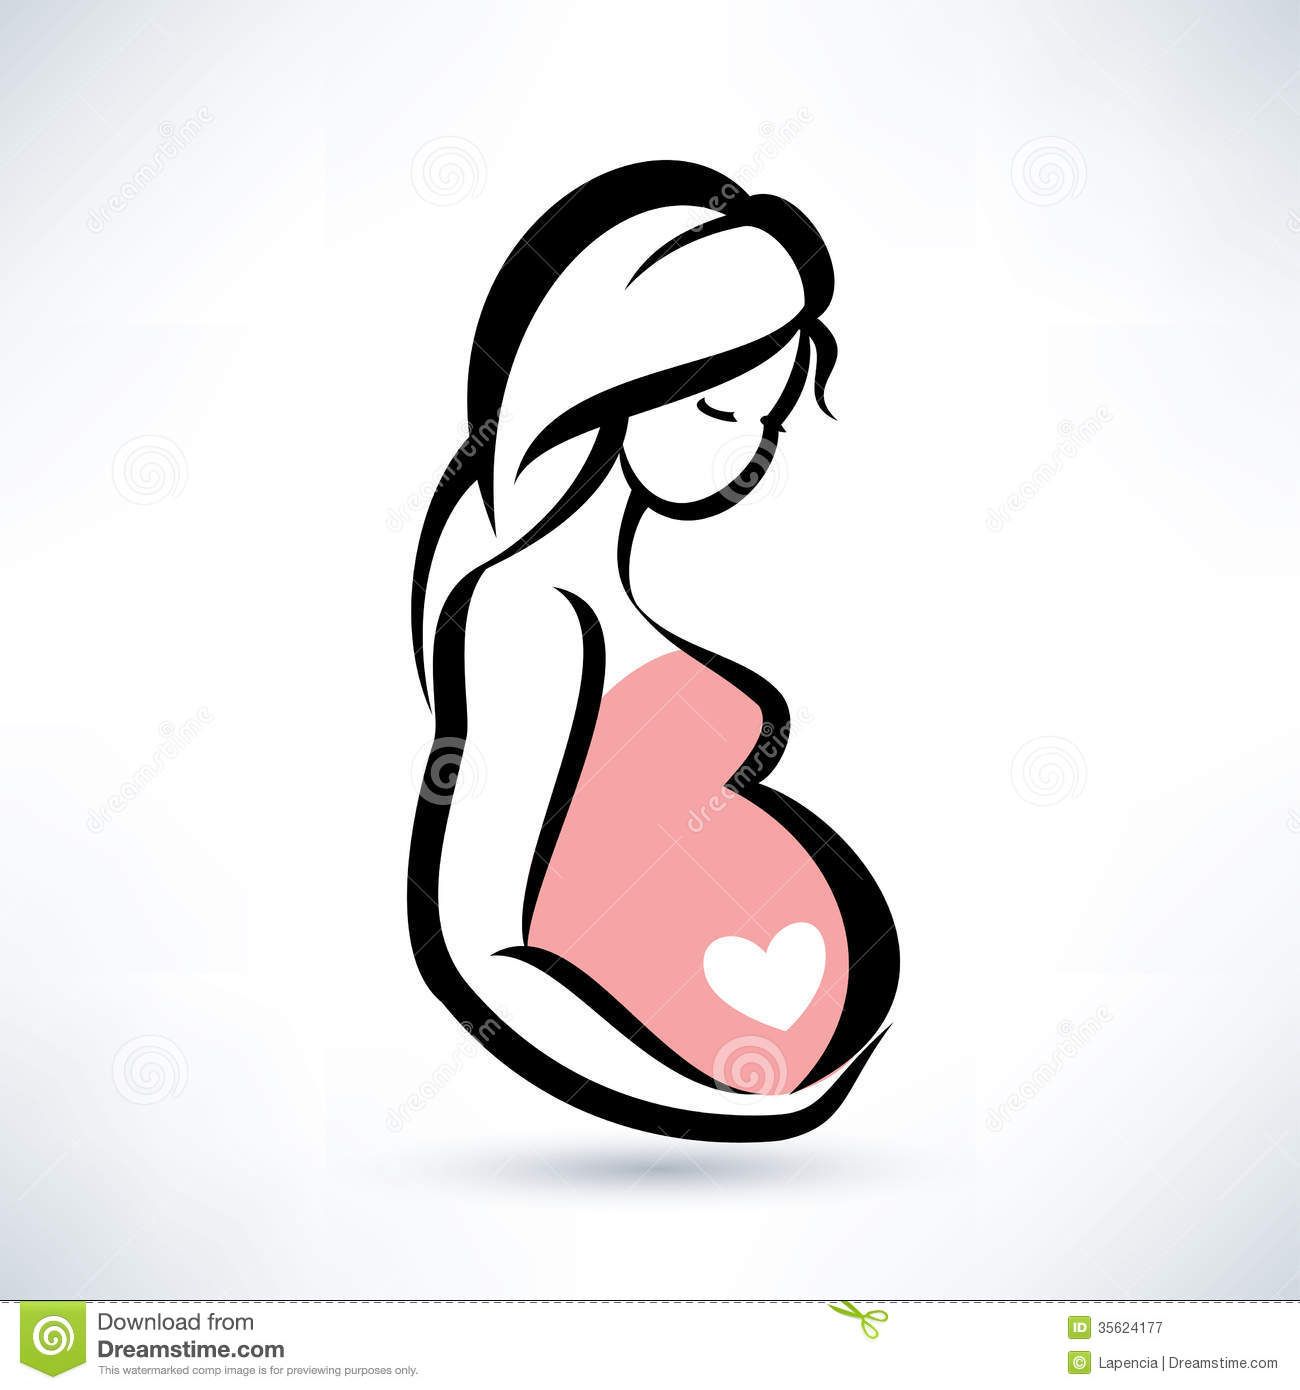 Pregnant Woman Royalty Free Stock Photography.